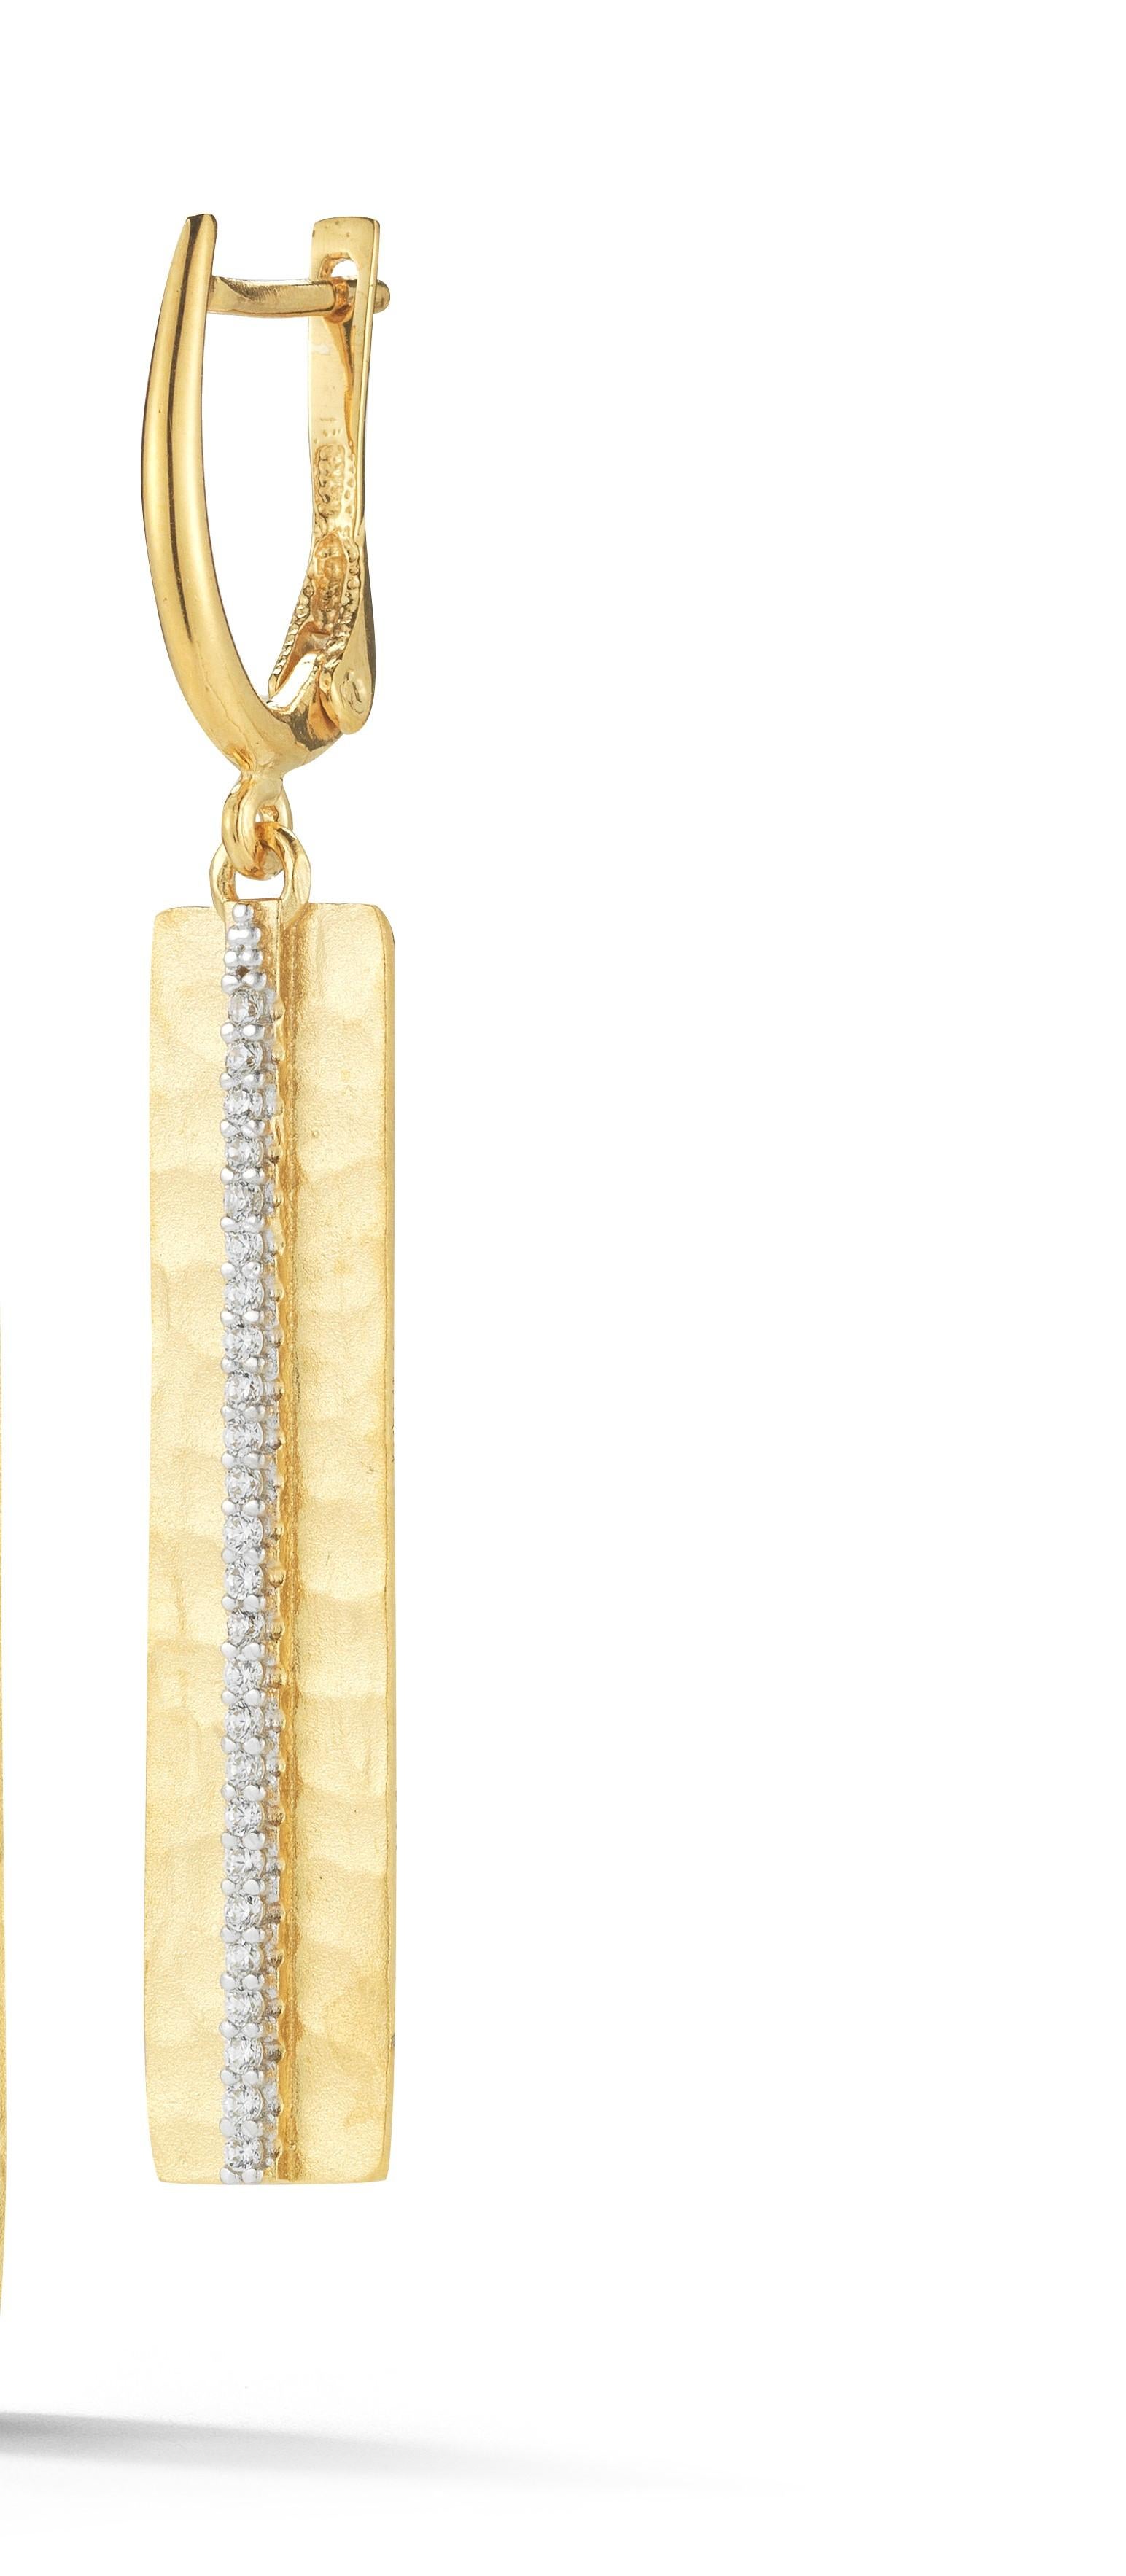 14 Karat Yellow Gold Hand-Crafted Matte And Hammer-Finished Dog Tag Earrings, Accented With 0.30 Carats Of Pave Set Diamonds, and Dangling on a Leverback Backfinding.
